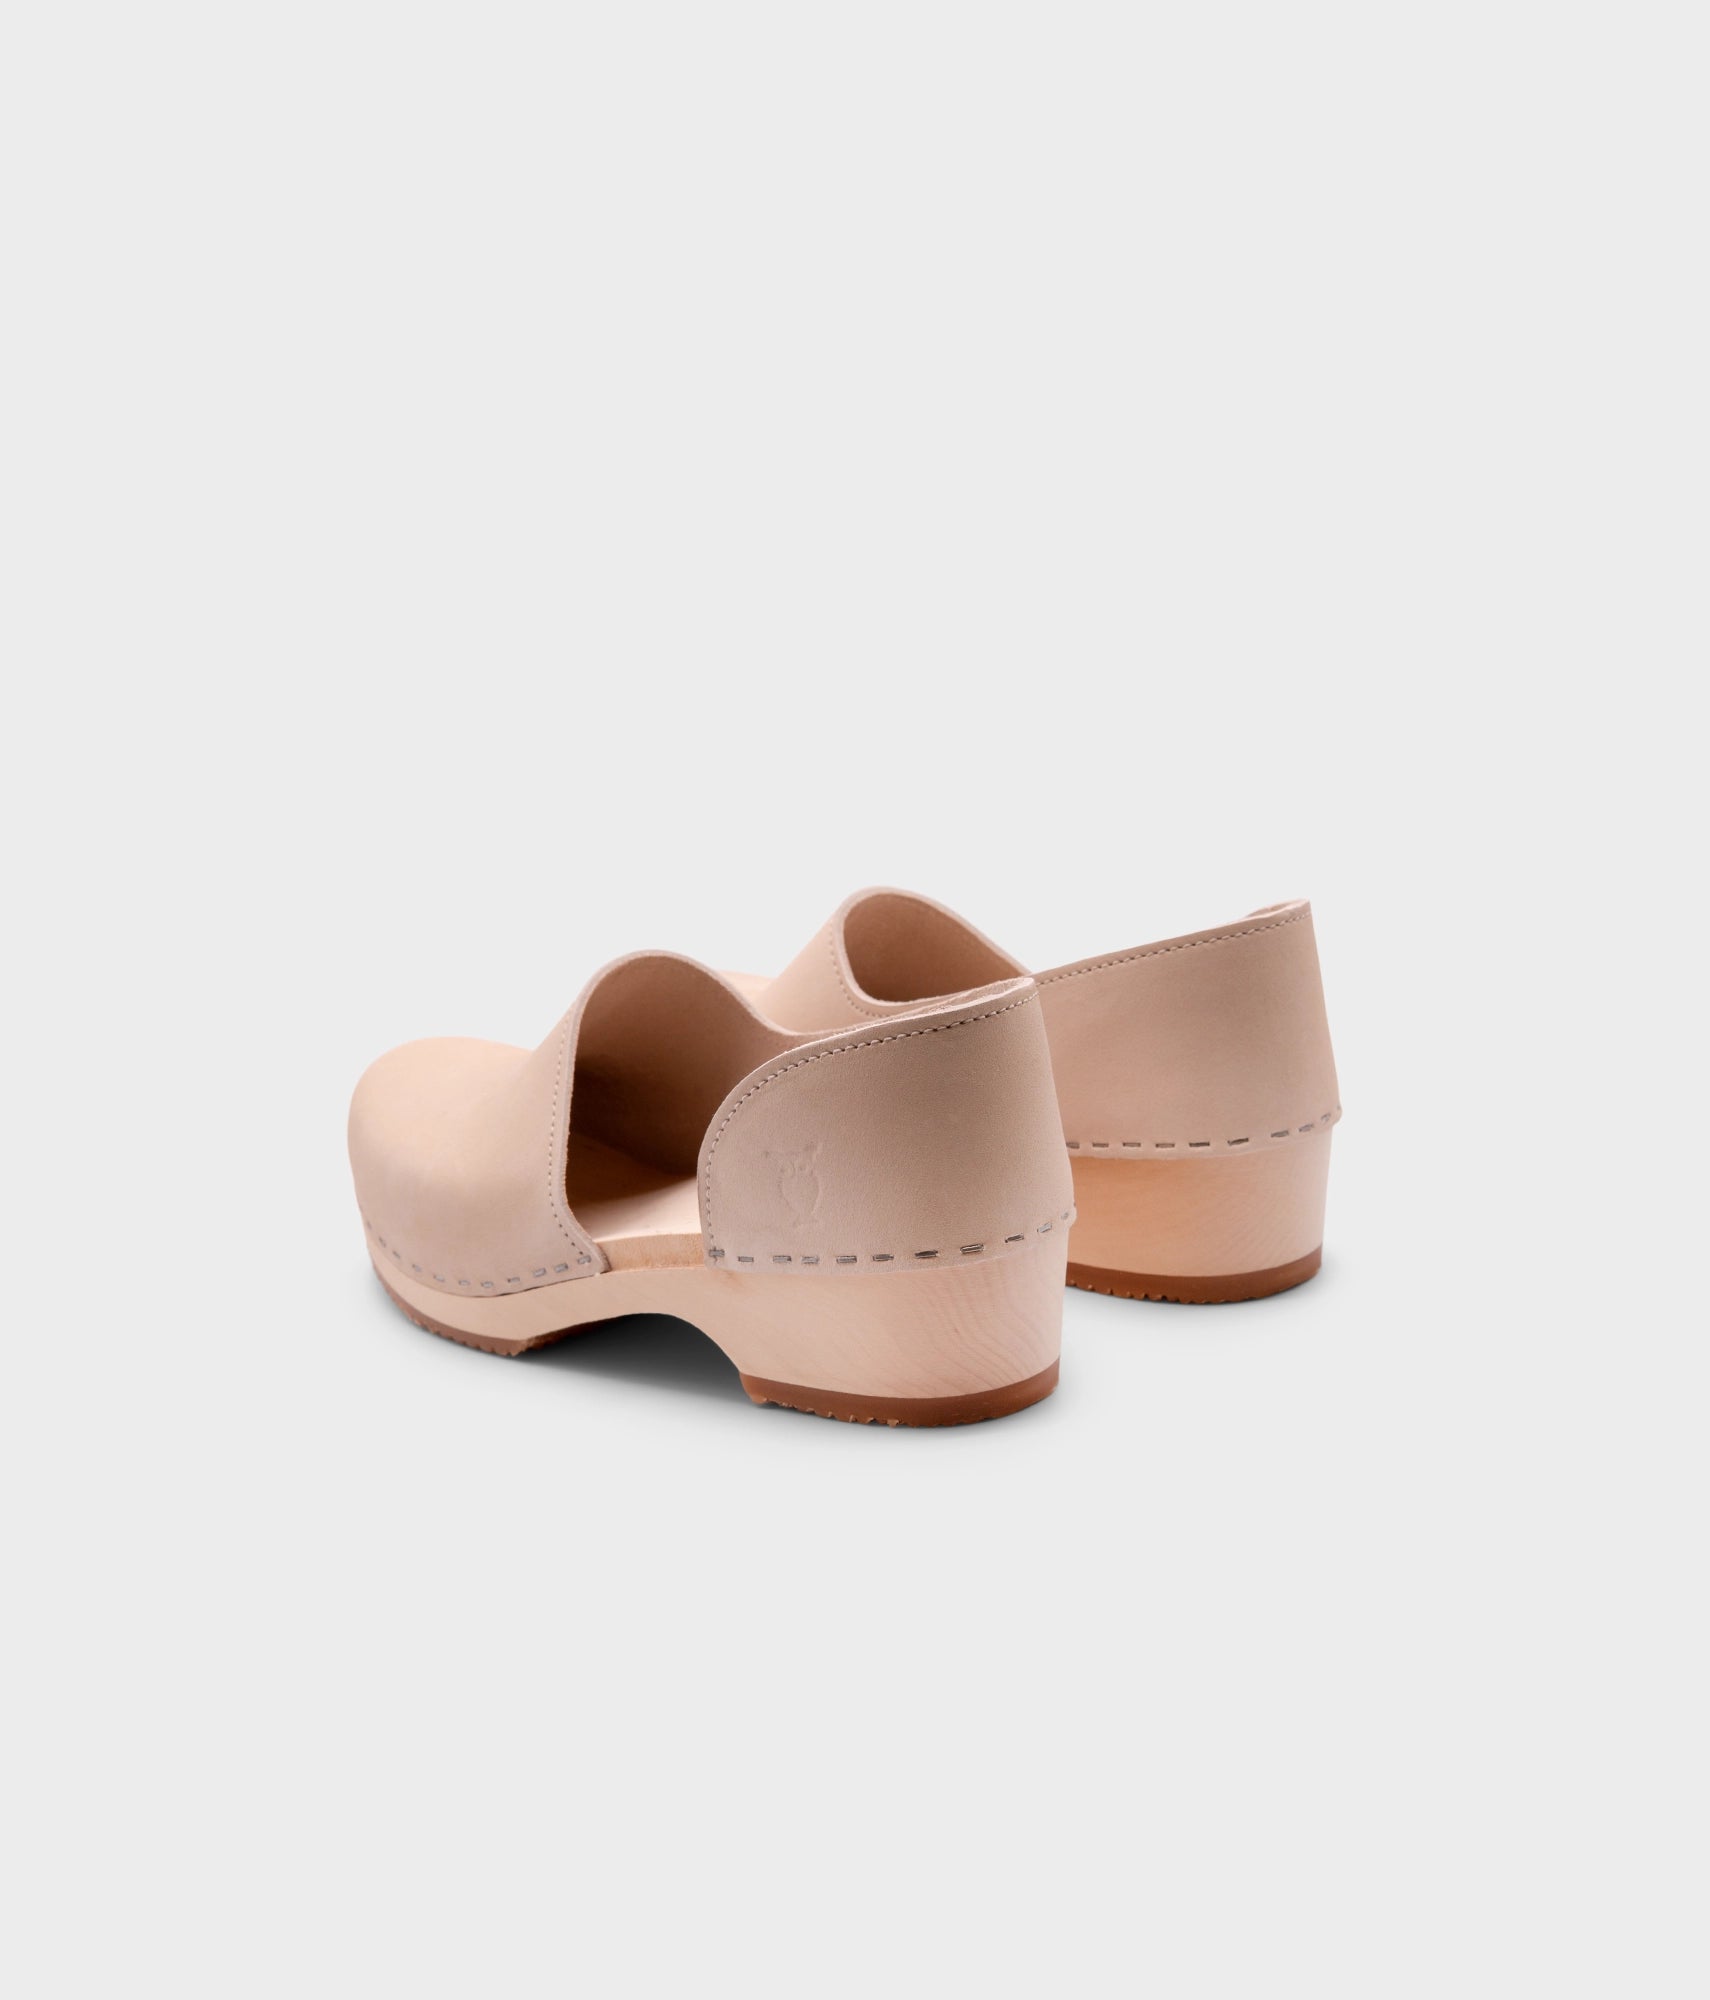 low heeled closed-back clogs in sand white nubuck leather stapled on a light wooden base